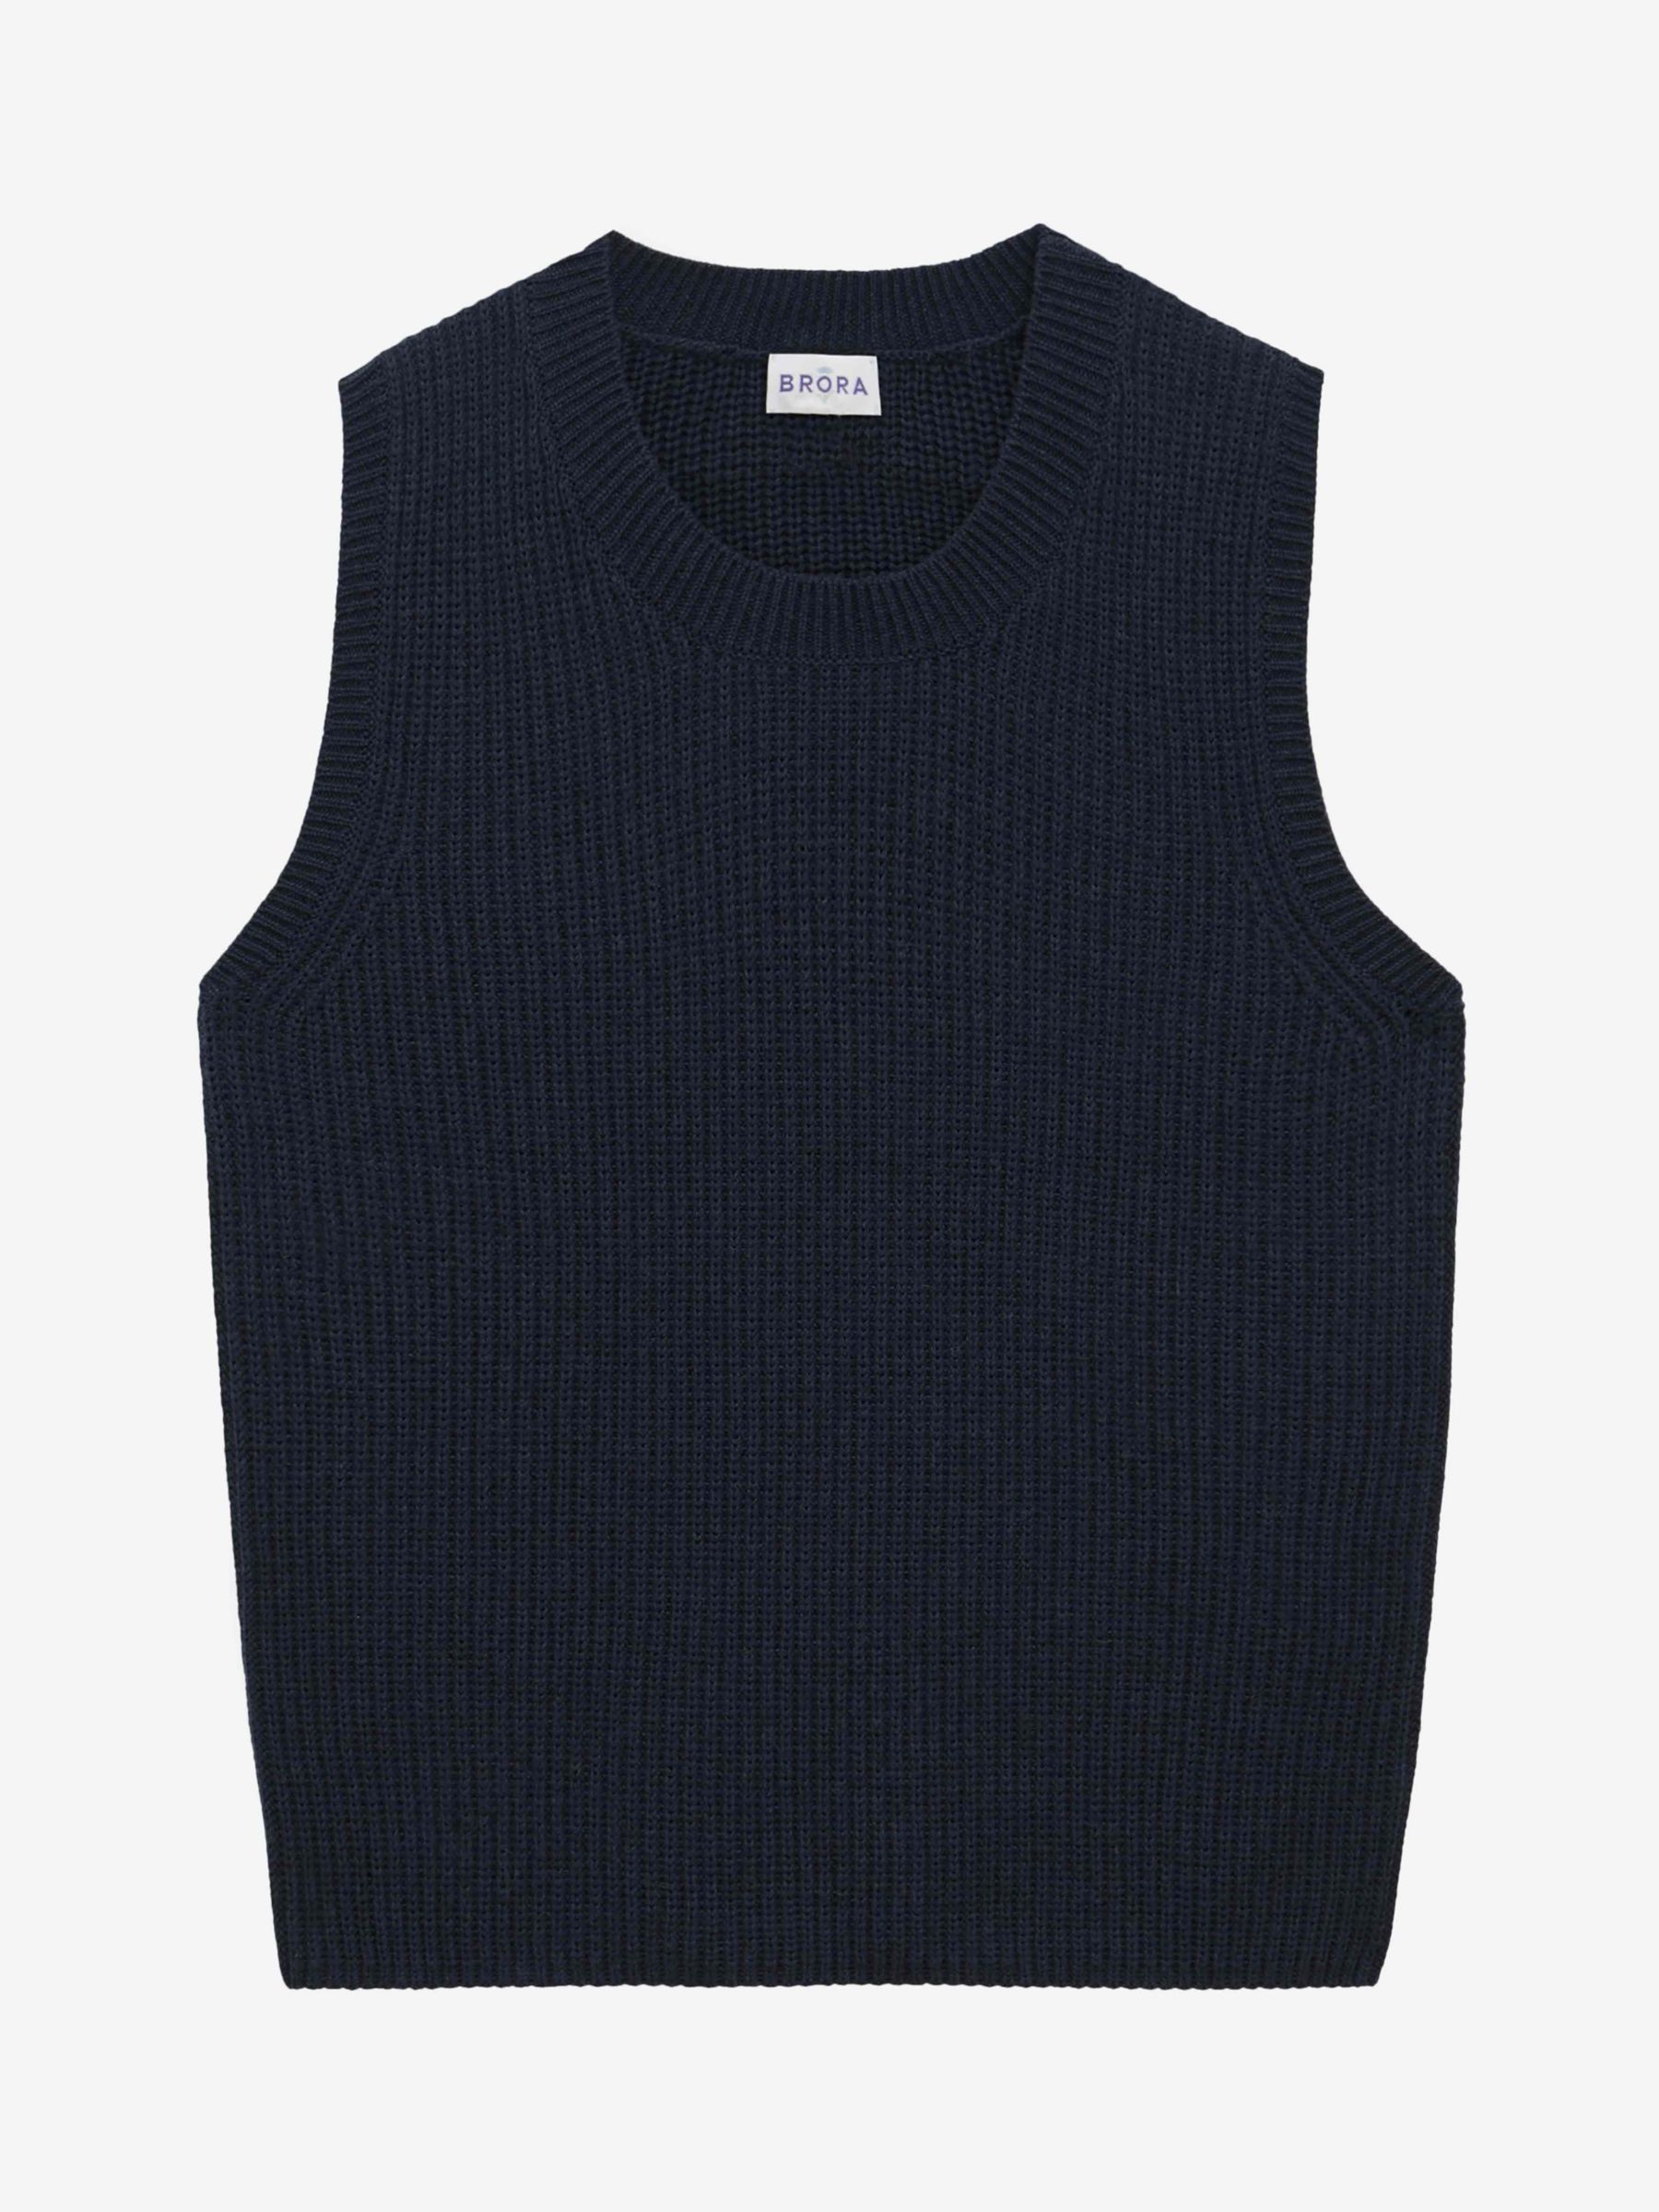 Buy Brora Knitted Ribbed Tank Top Online at johnlewis.com